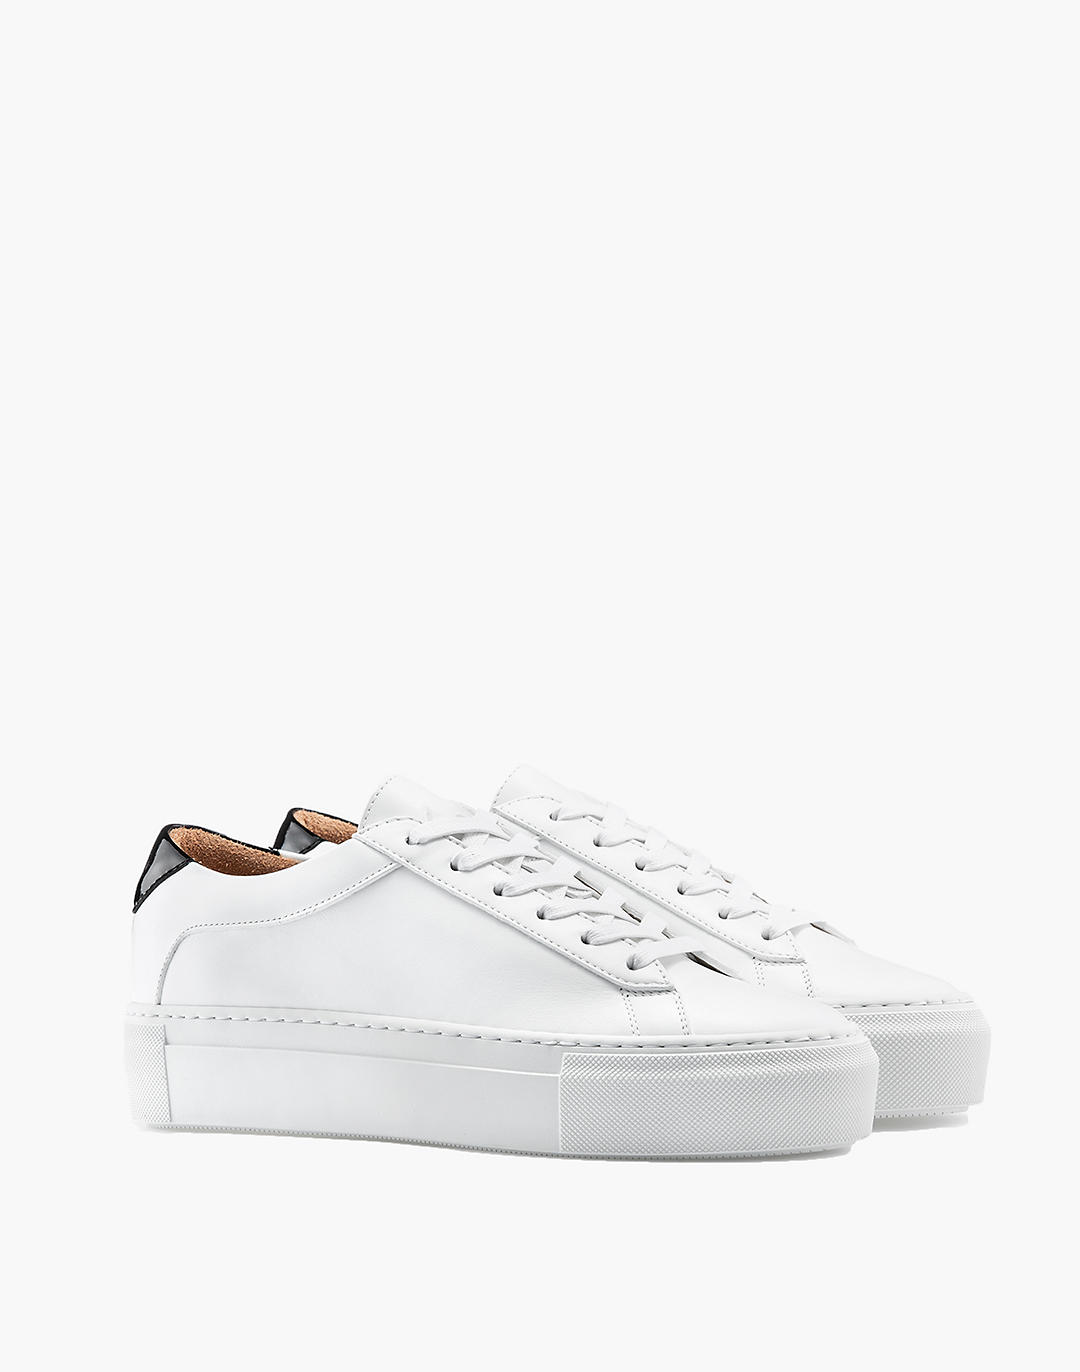 Koio Bianco Sneakers in White Leather